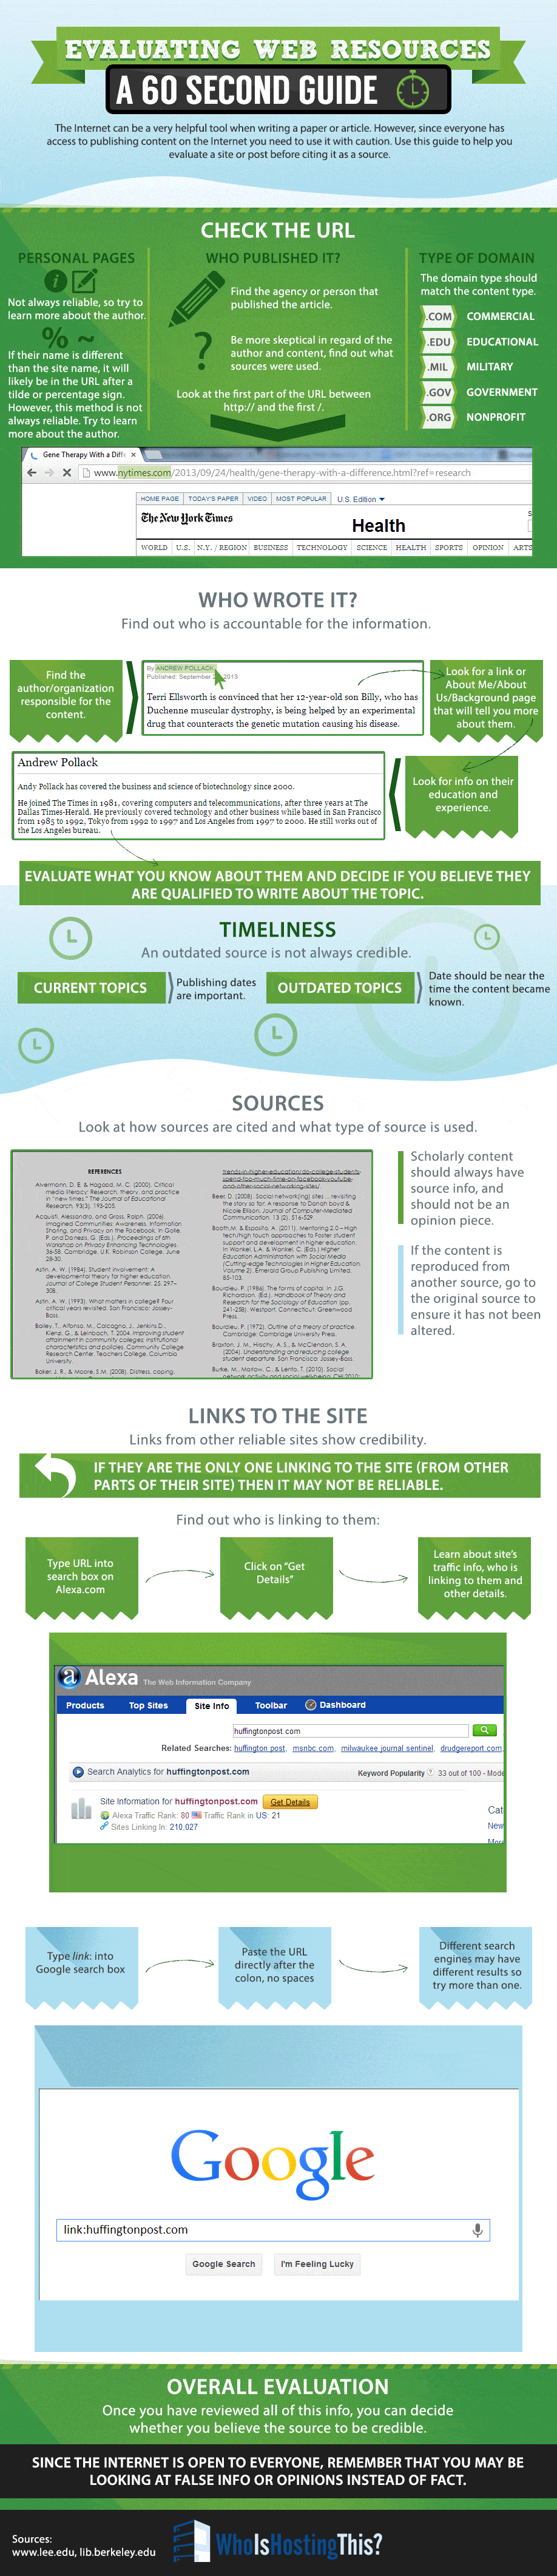 How-to-Evaluate-Web-Resources-Infographic